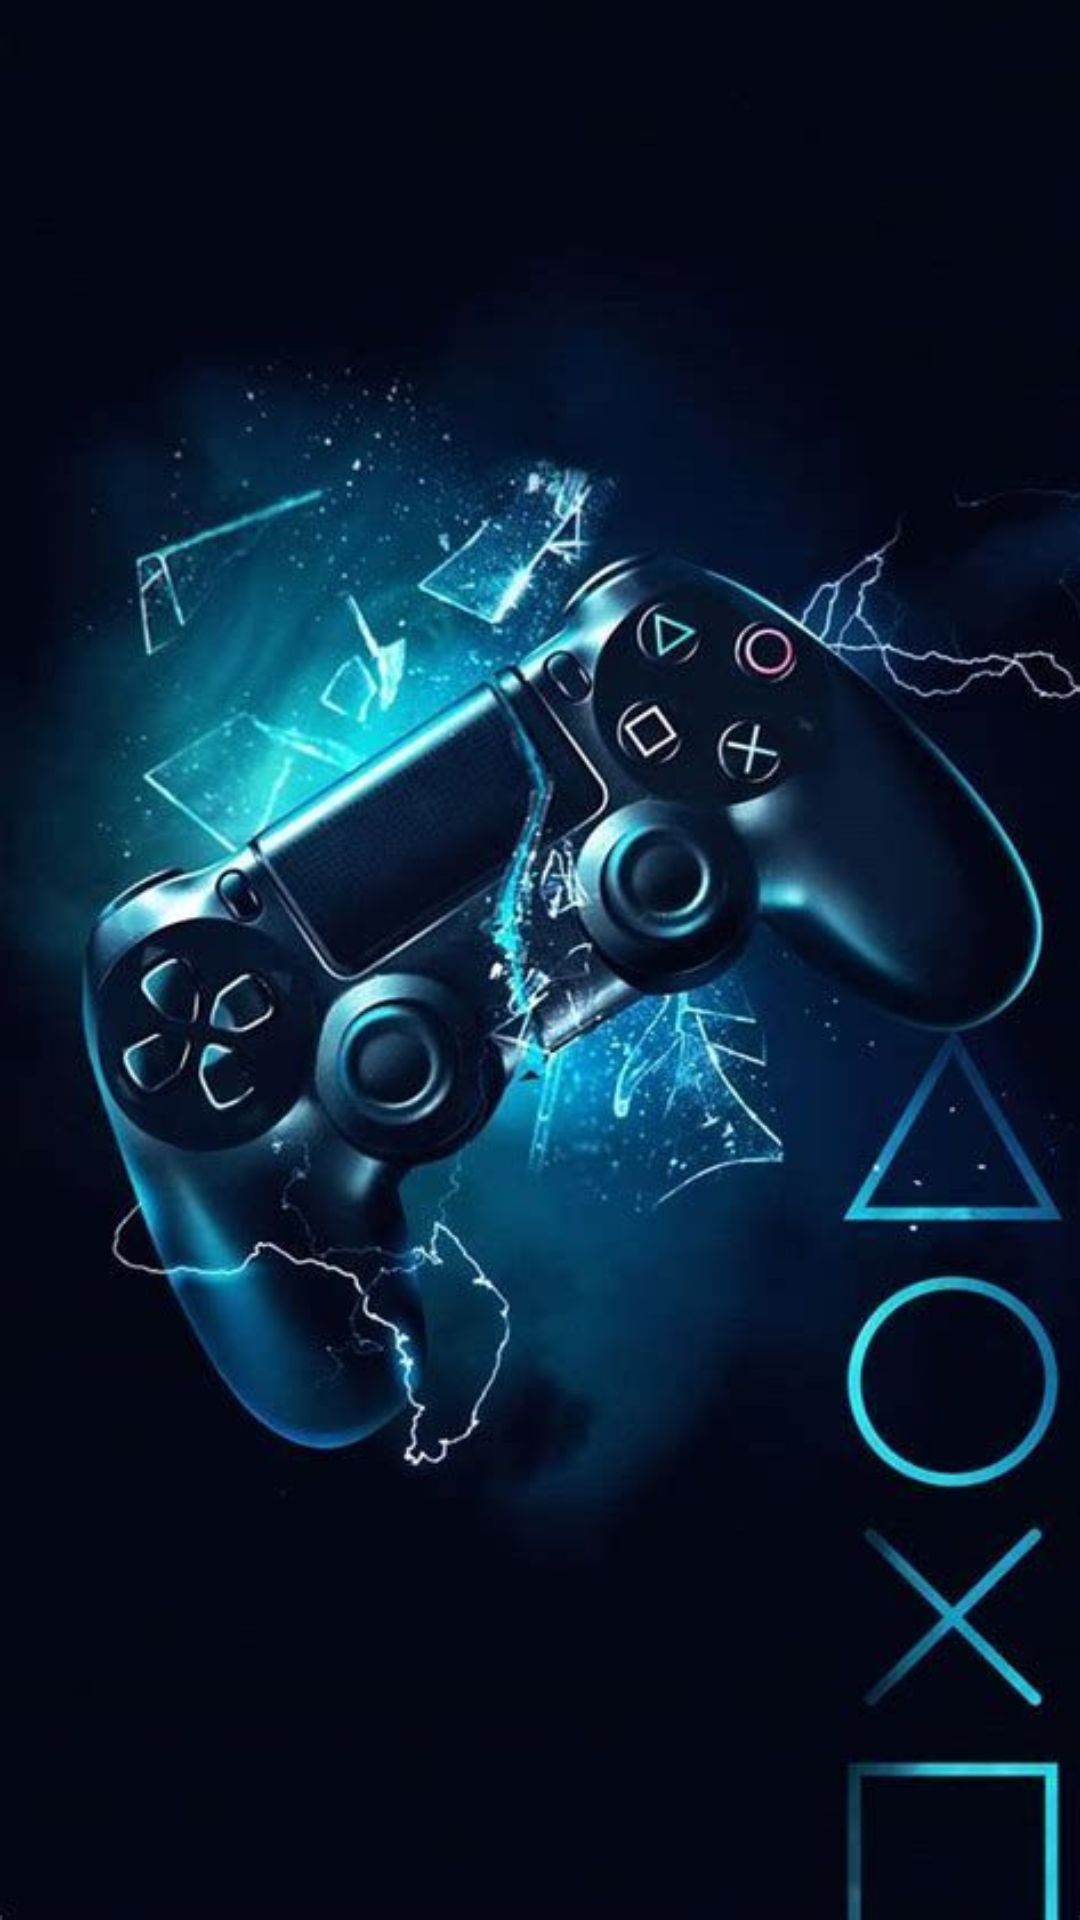 Cool Controller Wallpapers